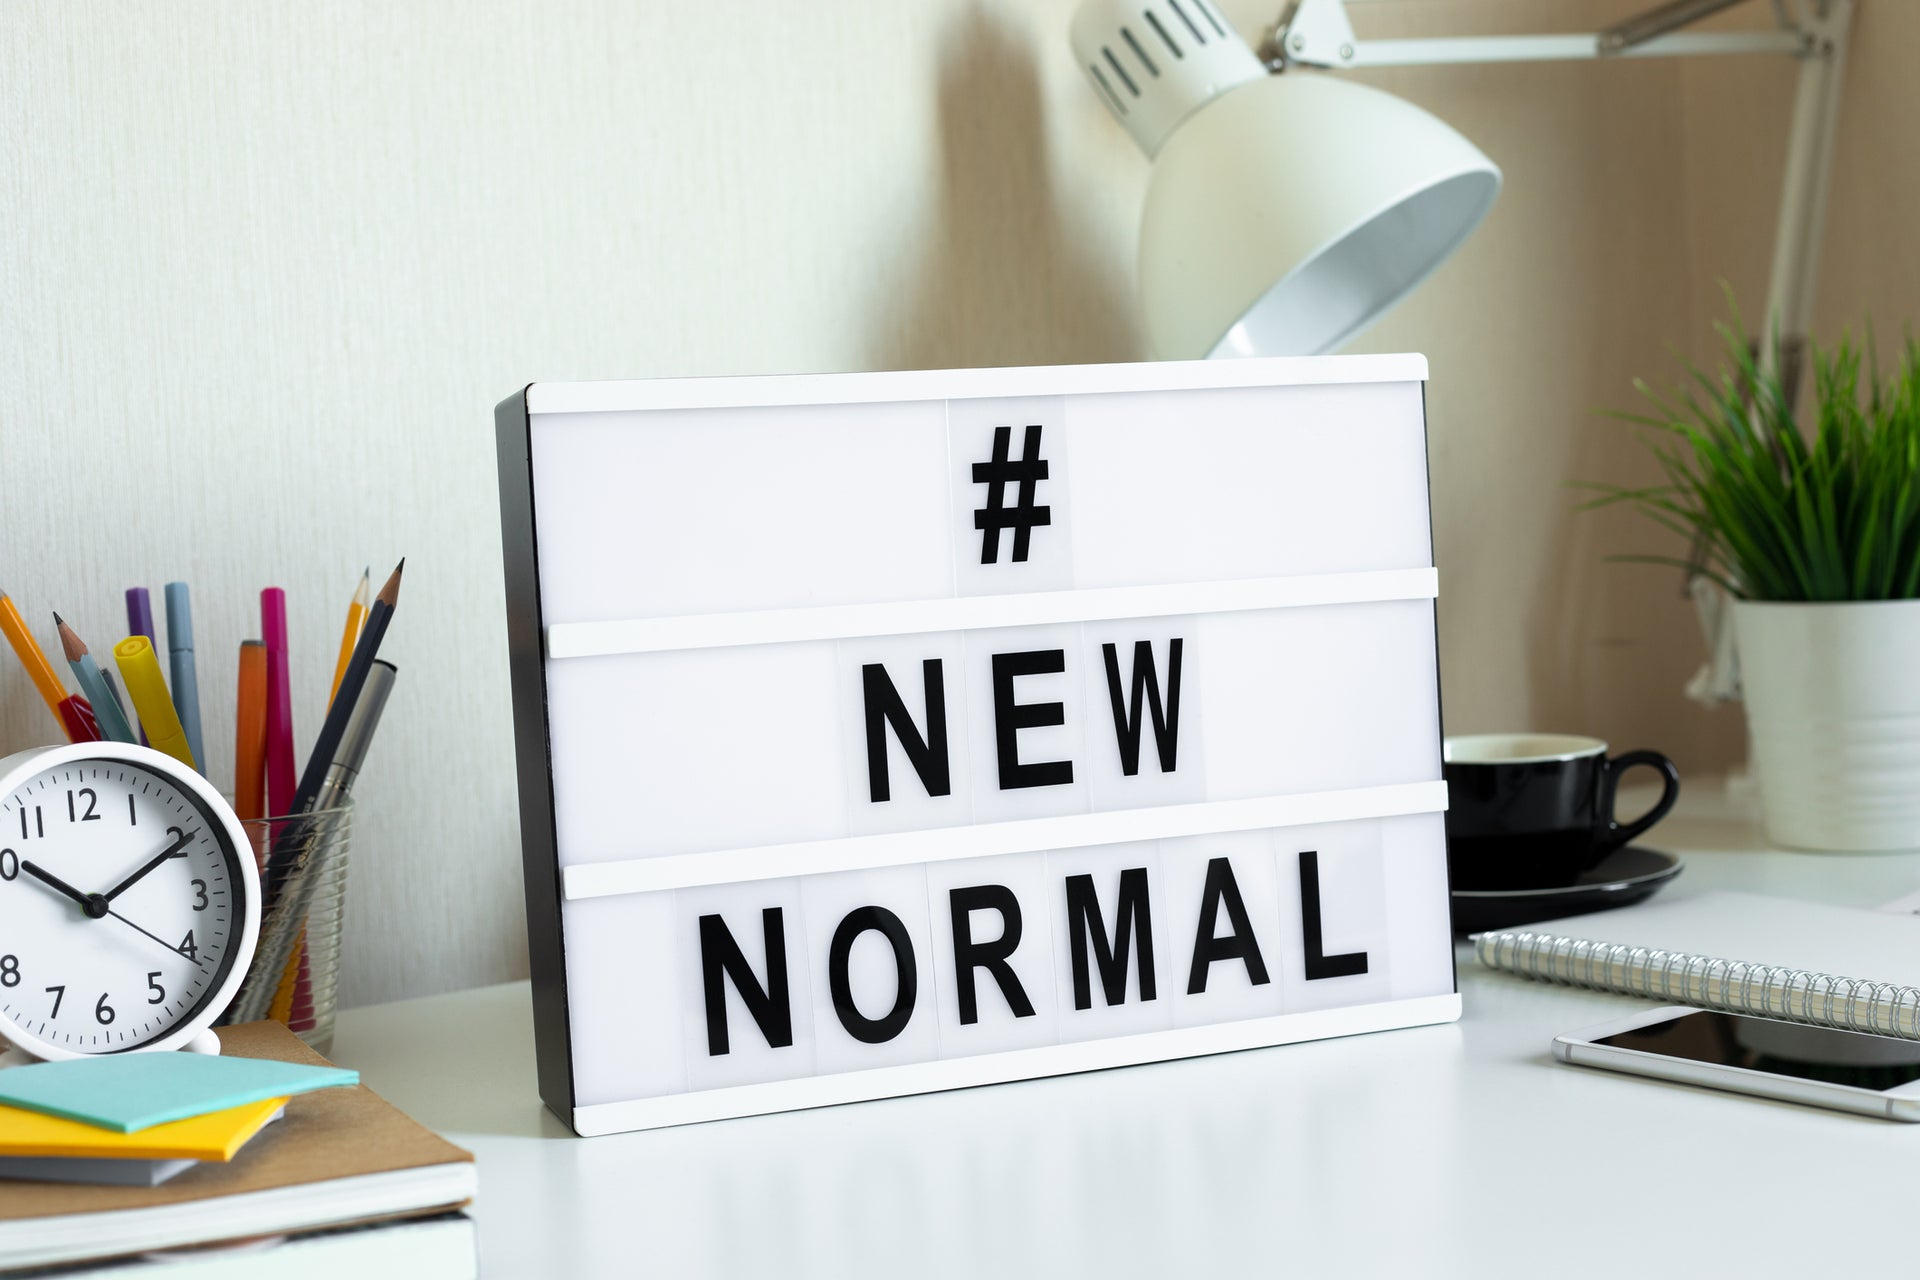 #New Normal